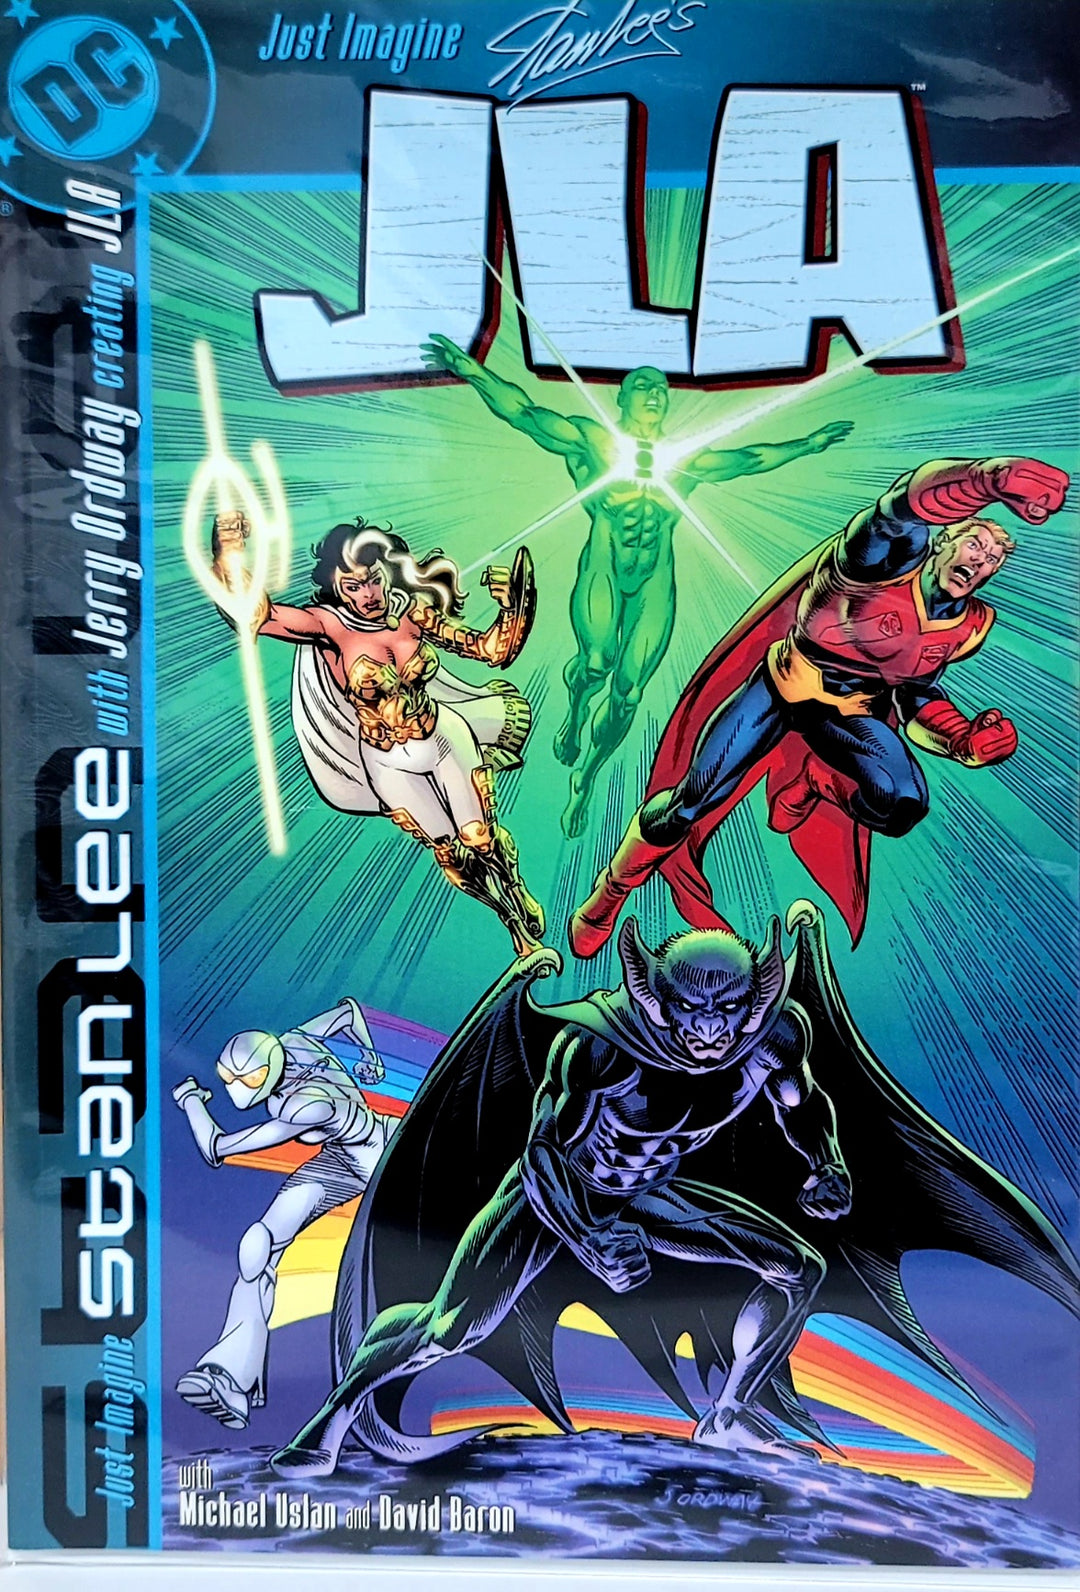 Just Imagine Stan Lee Creating The JLA #1 Signed!